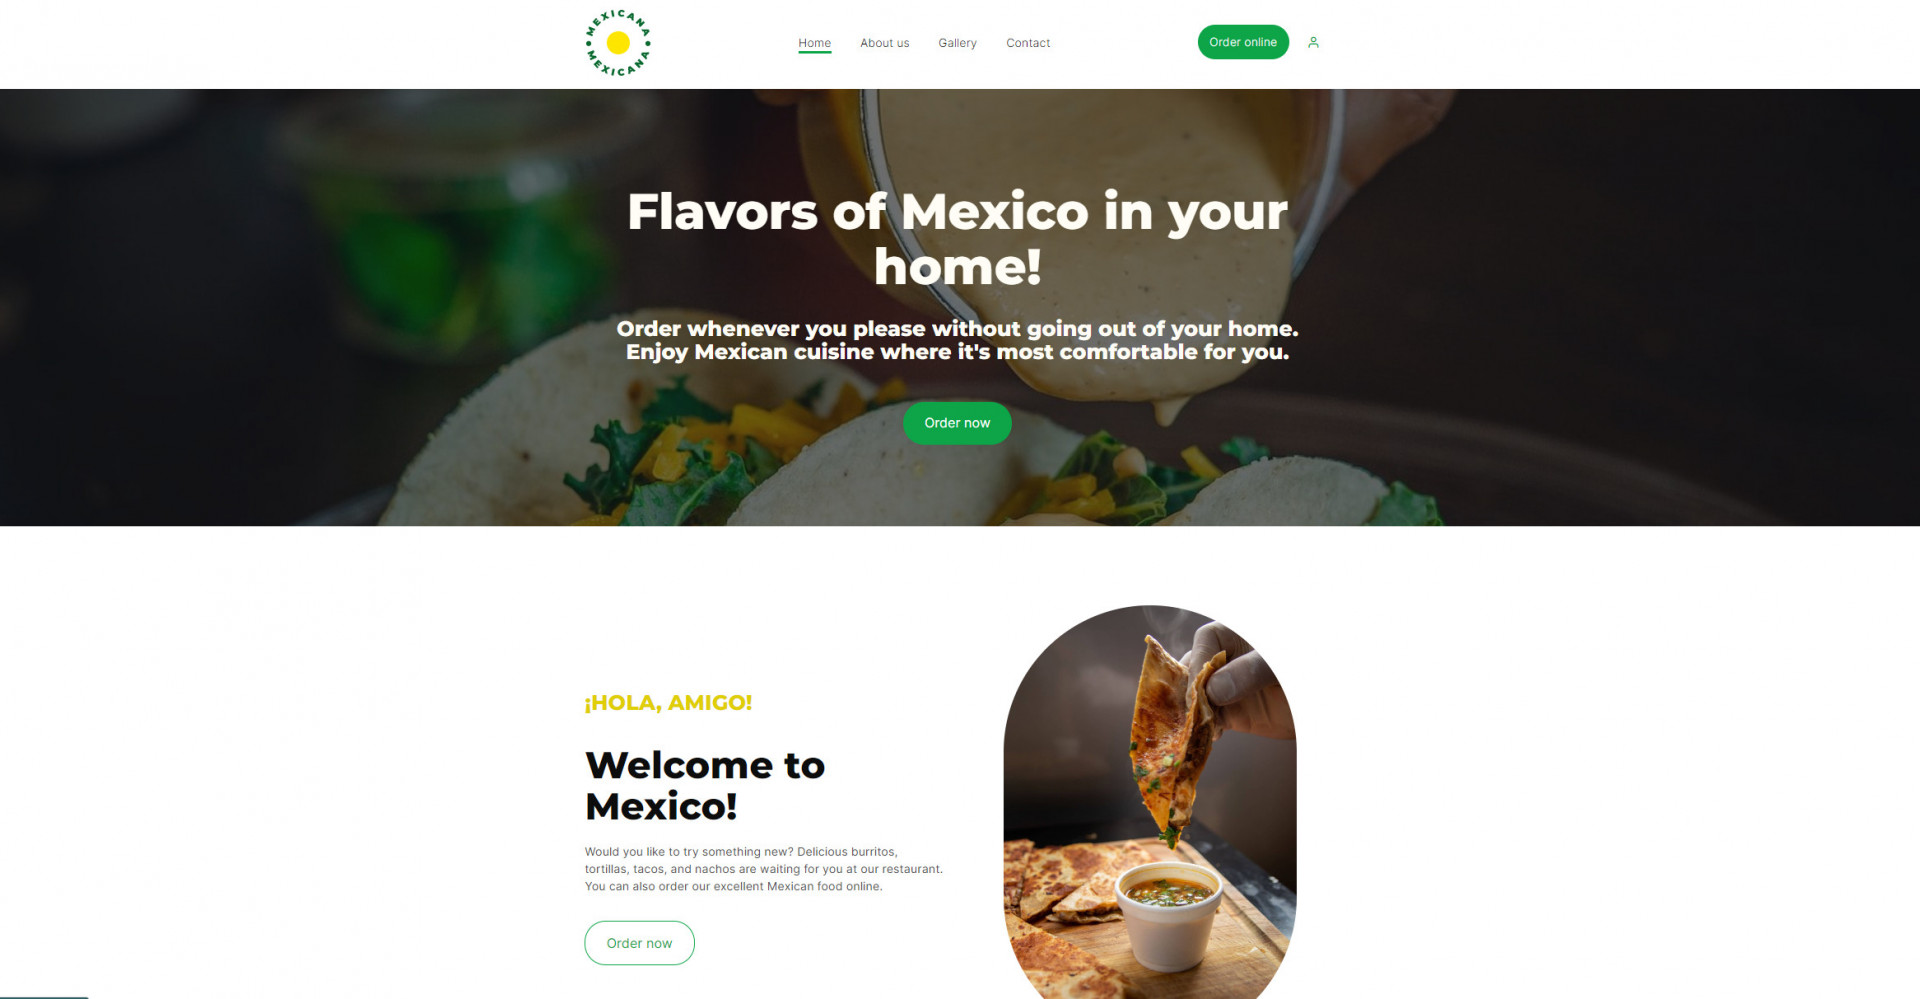 One of the beautiful restaurant websites for businesses that serve Mexican food